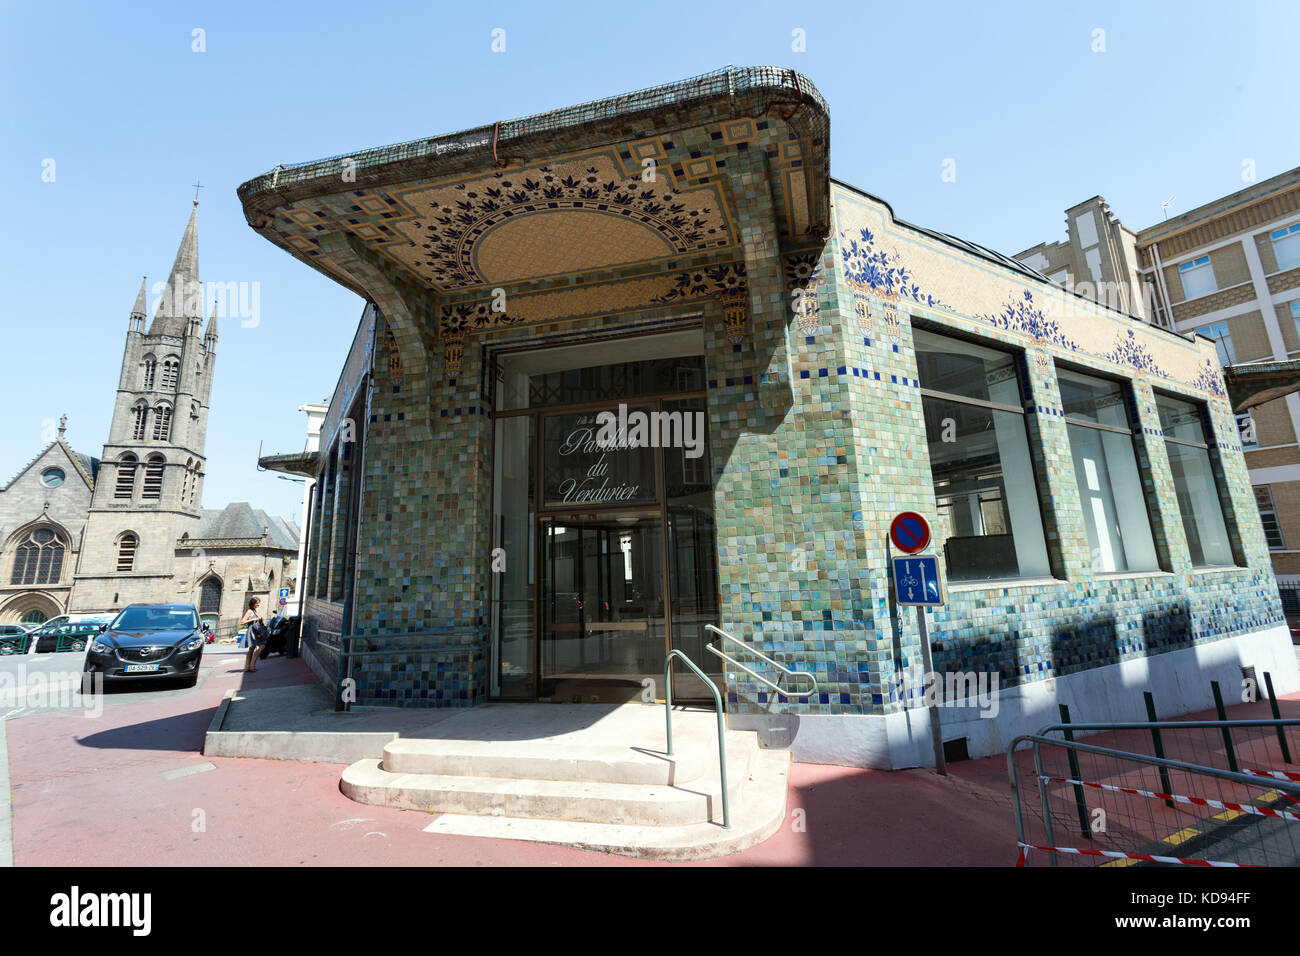 LIMOGES, LIMOUSIN, FRANCE - JULY 2, 2017: The entrance to the pavillon du Verdurier with it's mosaic walls and the Saint Pierre church in the back. Stock Photo